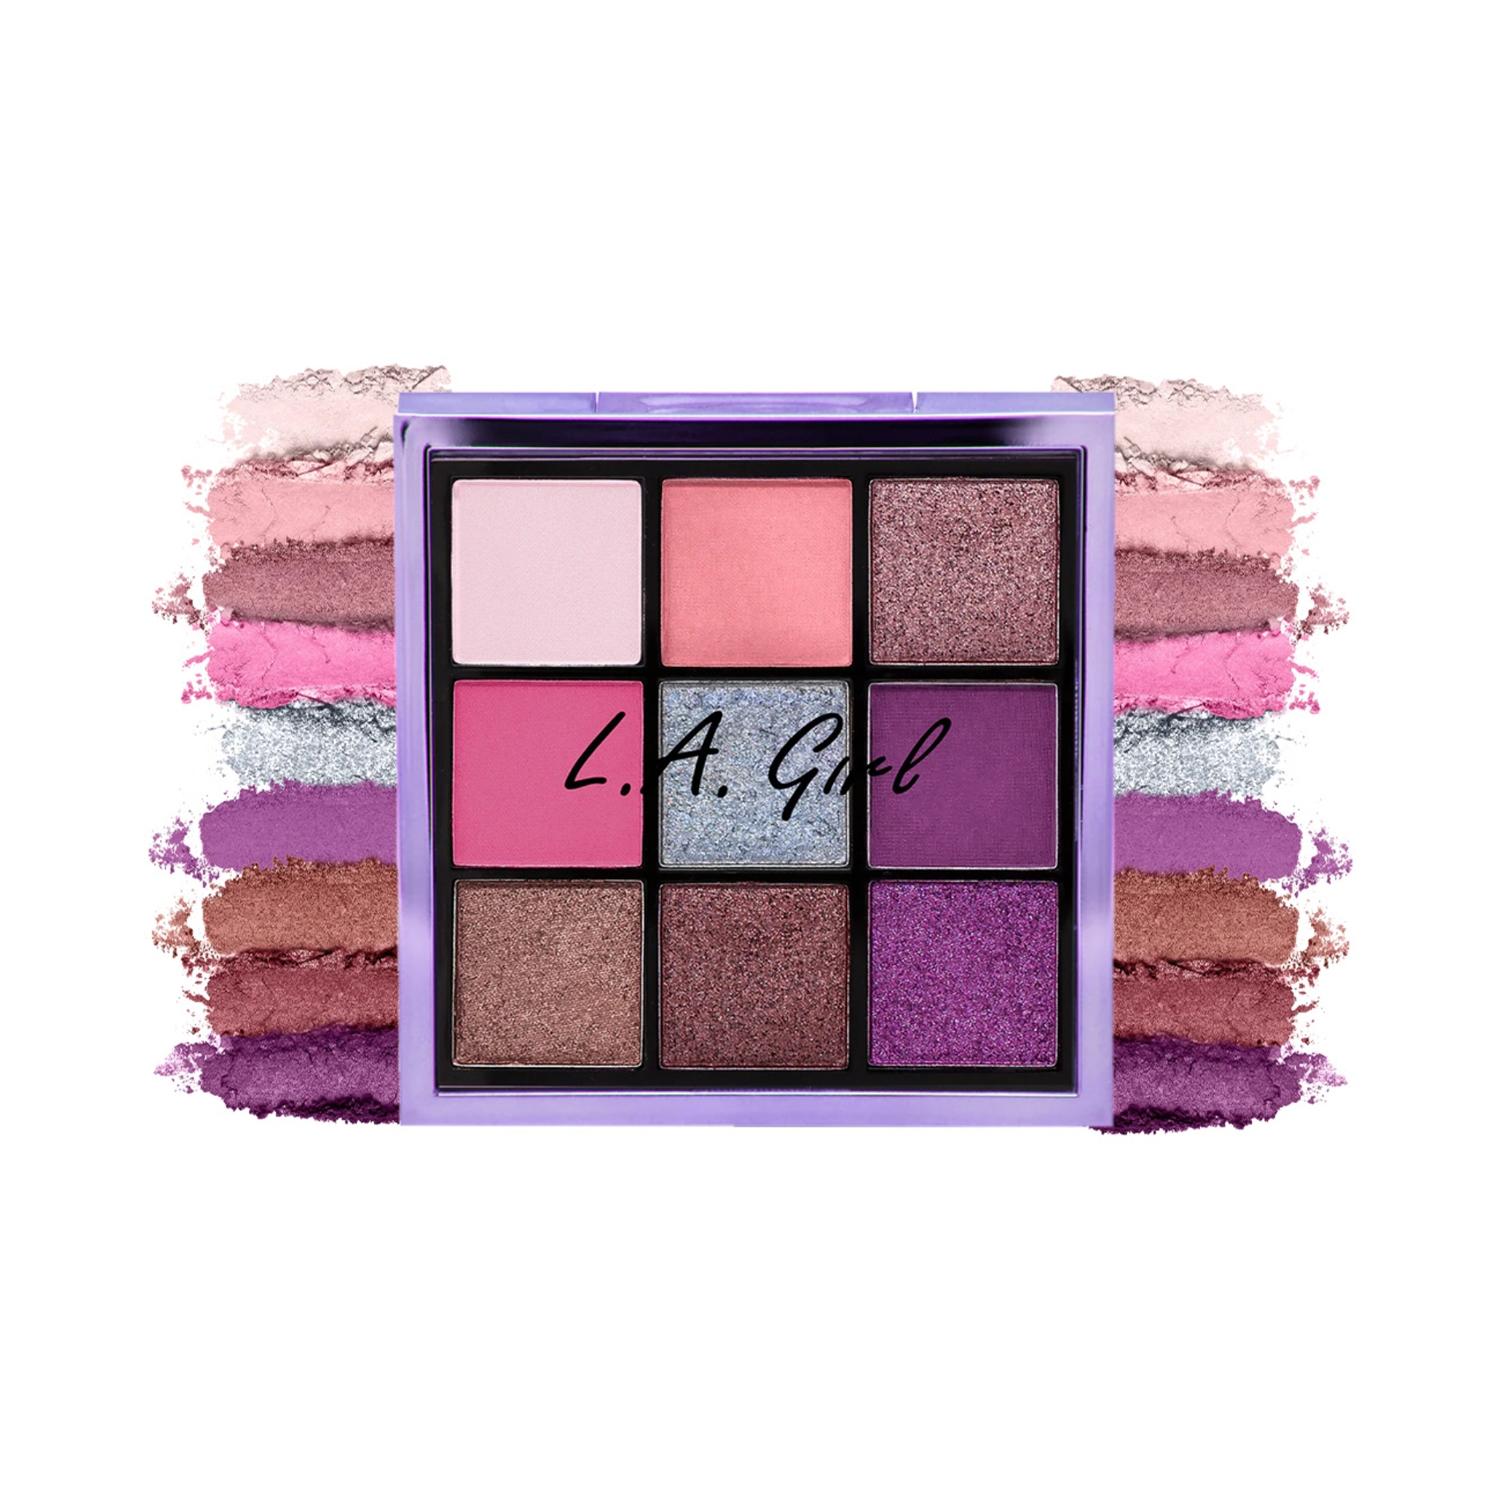 l.a.-girl-keep-it-playful-9-color-eyeshadow-palette---ges436-playtime-(14g)